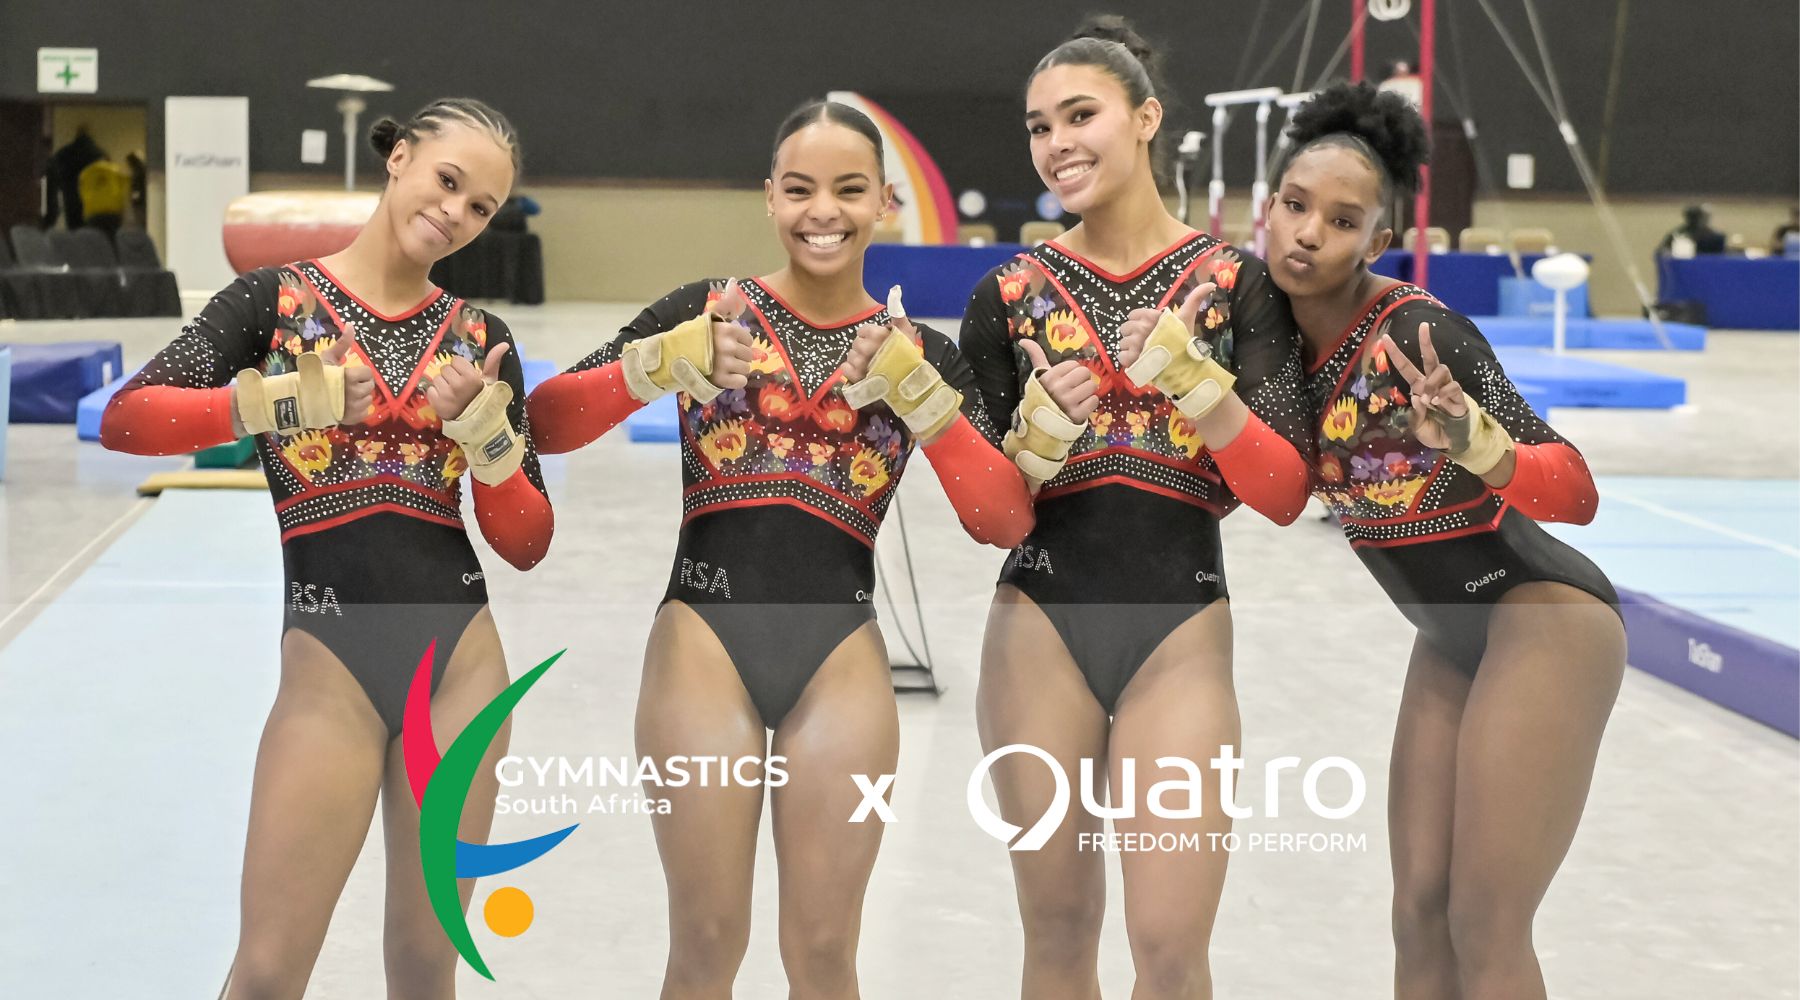 Quatro Gymnastics and Gymnastics South Africa Join Forces in New Partnership